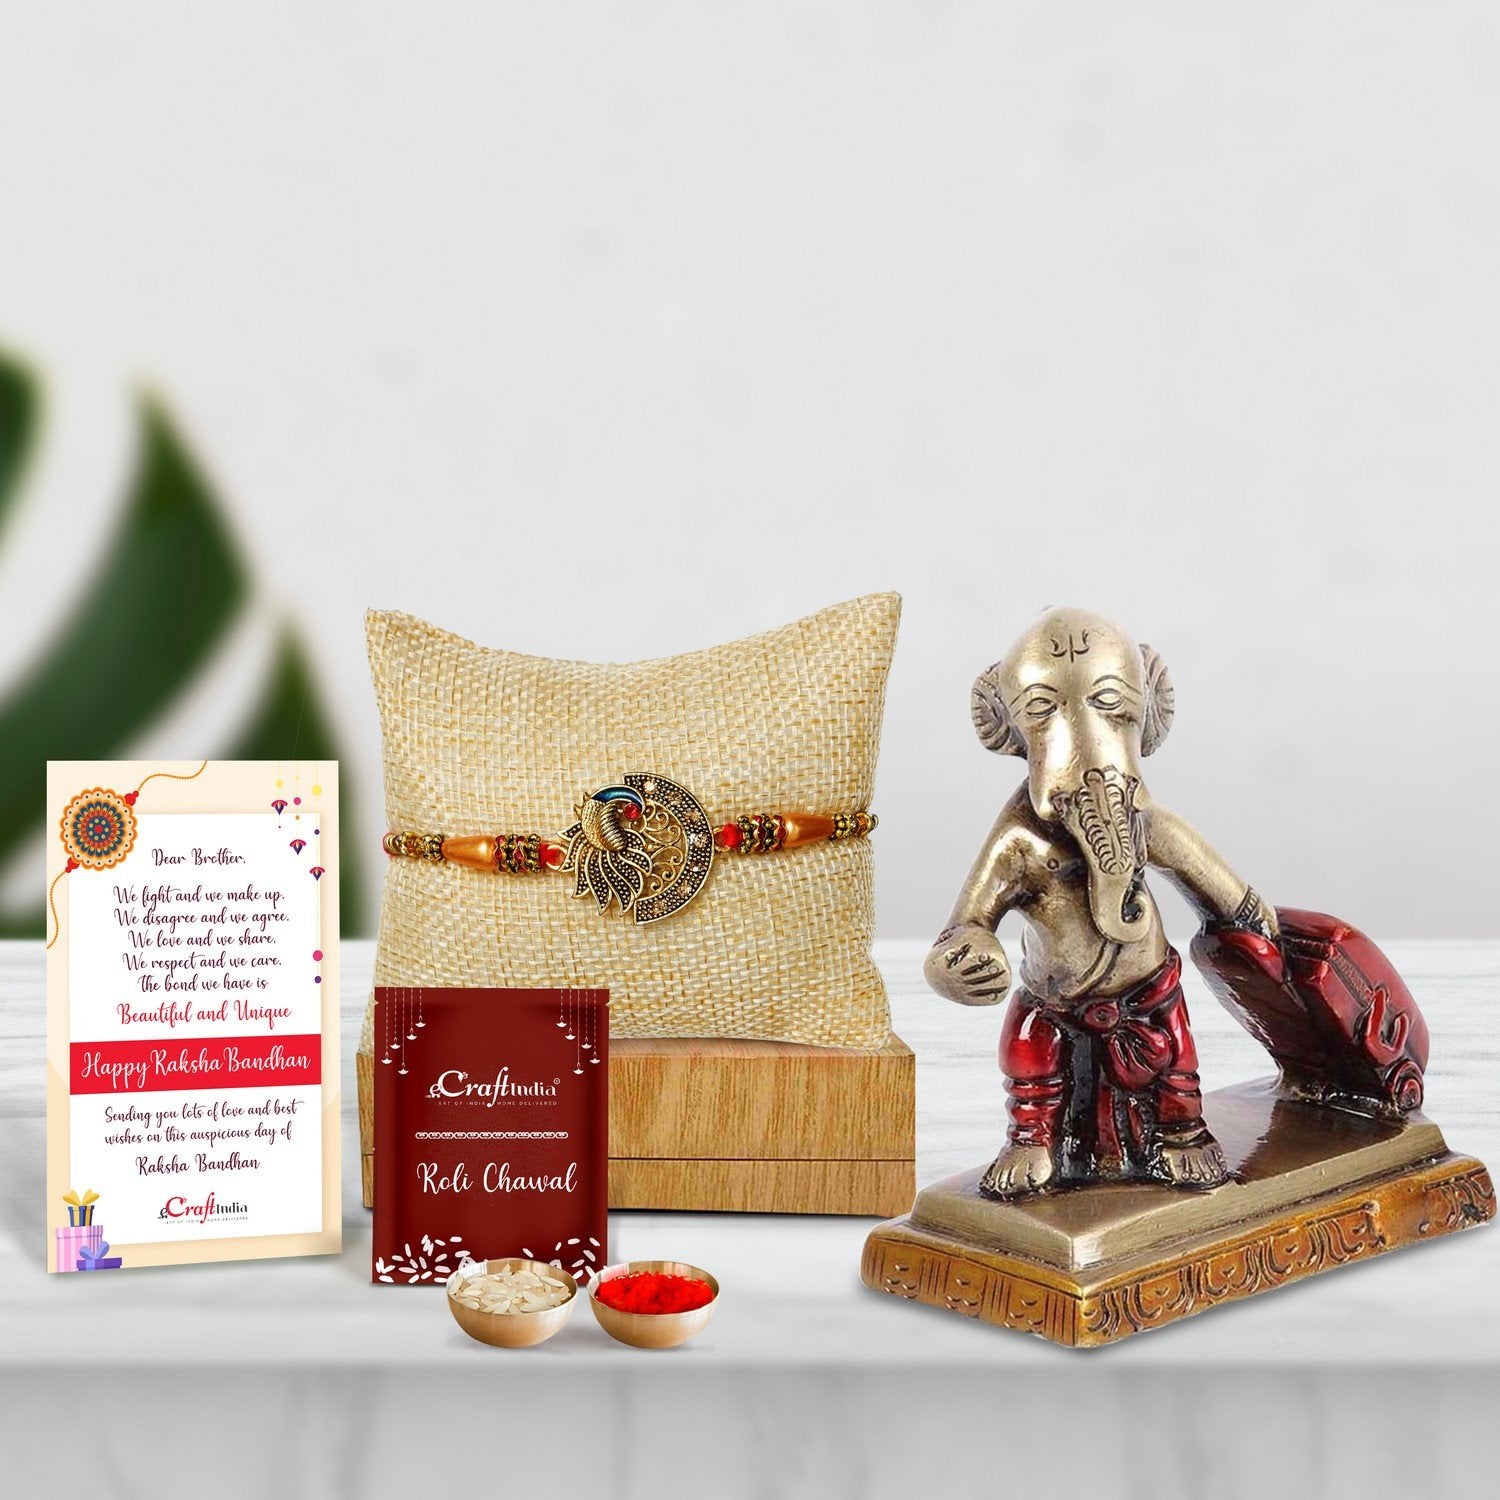 Designer Peacock Rakhi with Brass Ganesha Carrying Happiness around the world Antique Showpiece and Roli Chawal Pack, Best Wishes Greeting Card